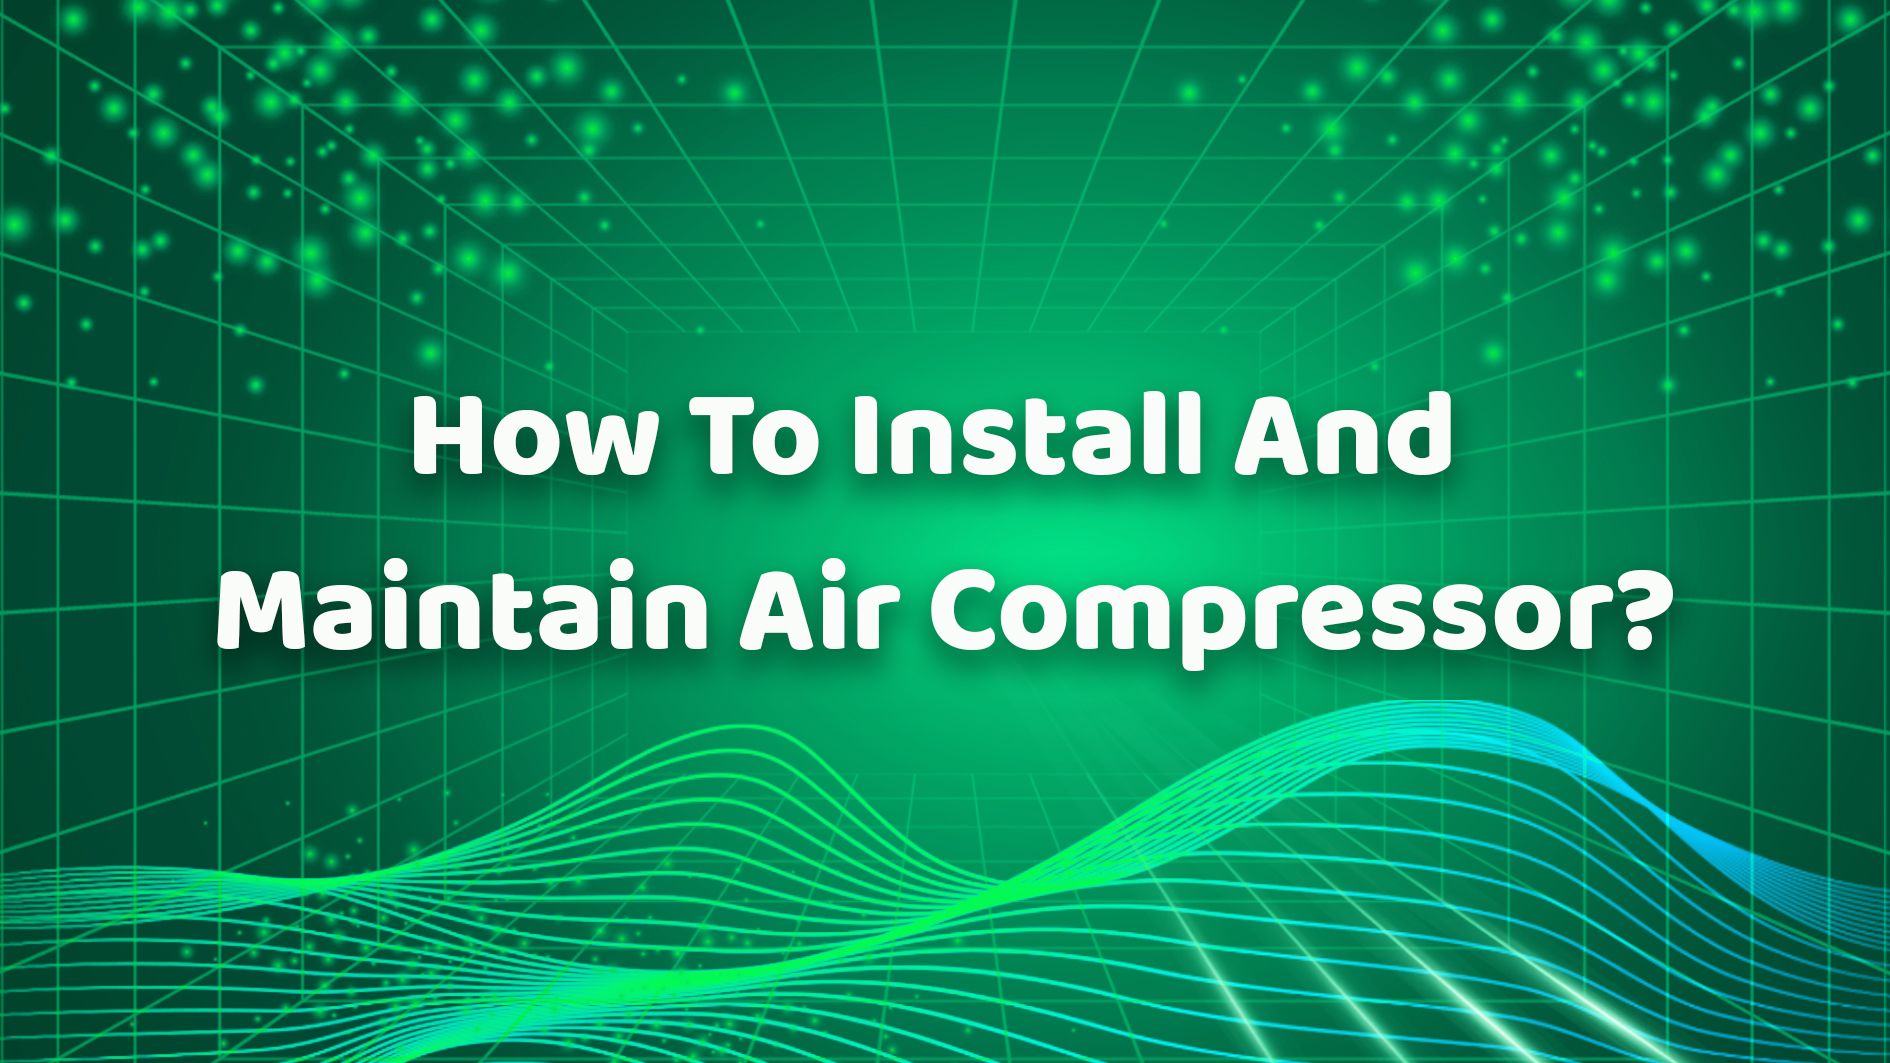 How To Install And Maintain Air Compressor?